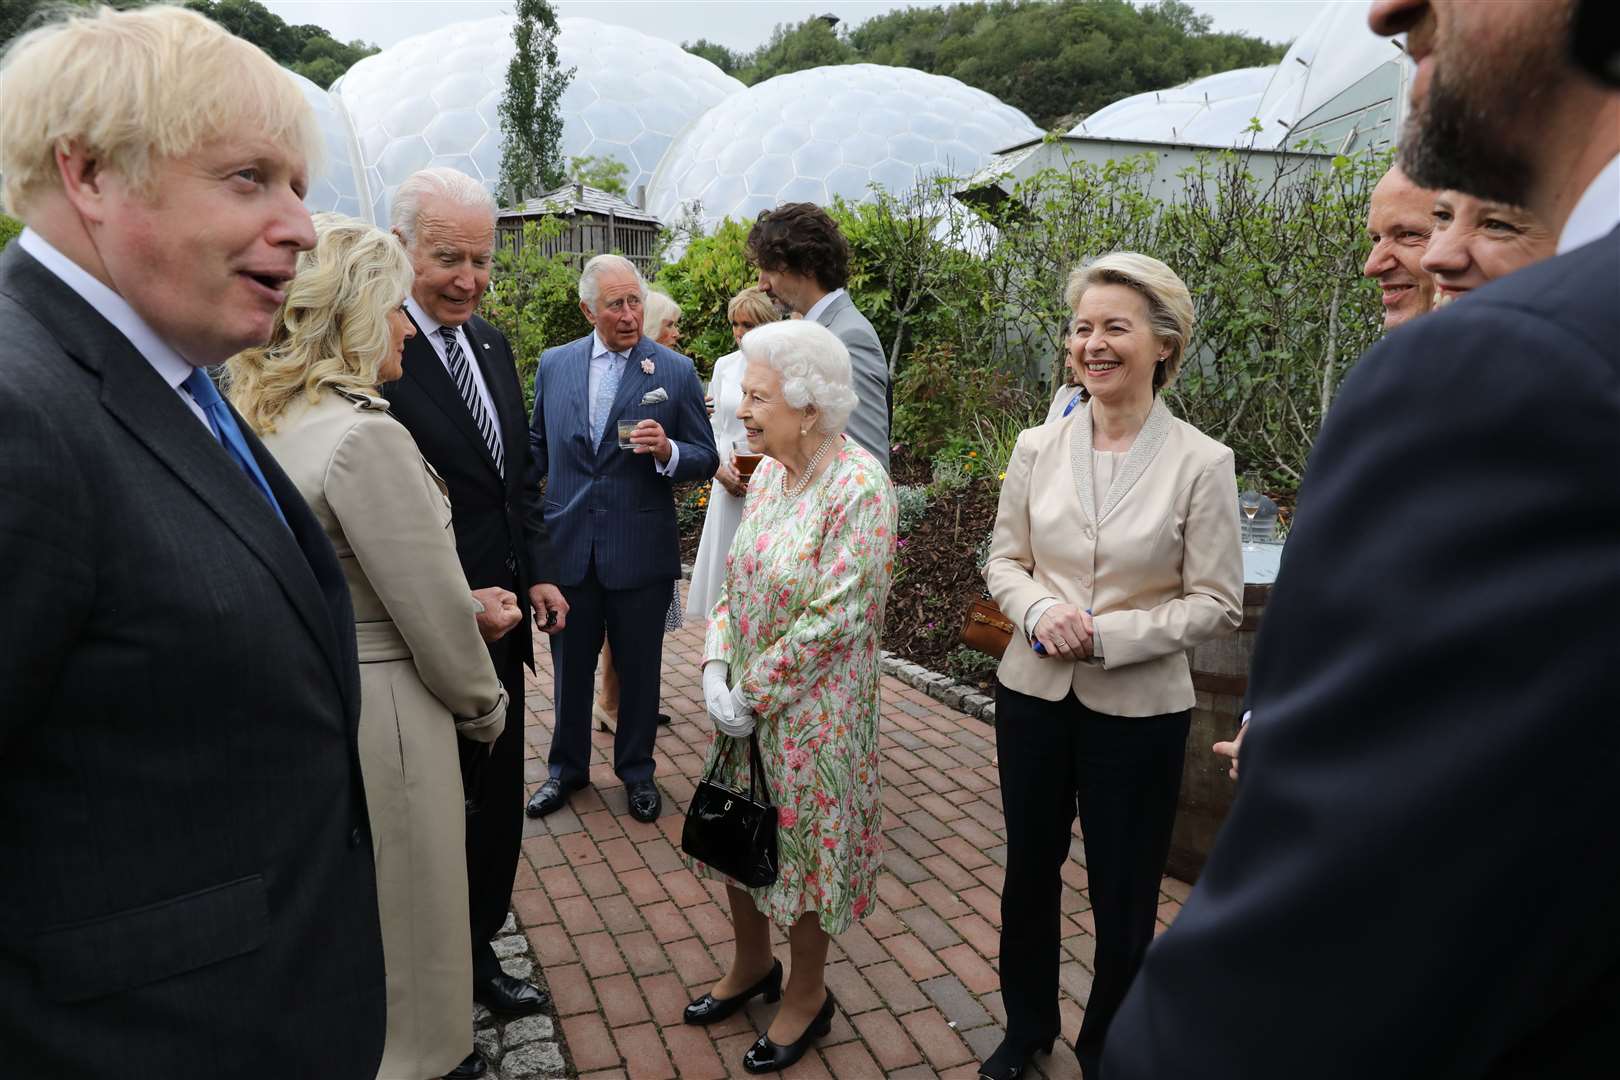 Boris Johnson at the Eden Project during the G7 summit while the Queen spoke to US President Joe Biden and his wife Jill (Jack Hill/The Times/PA)